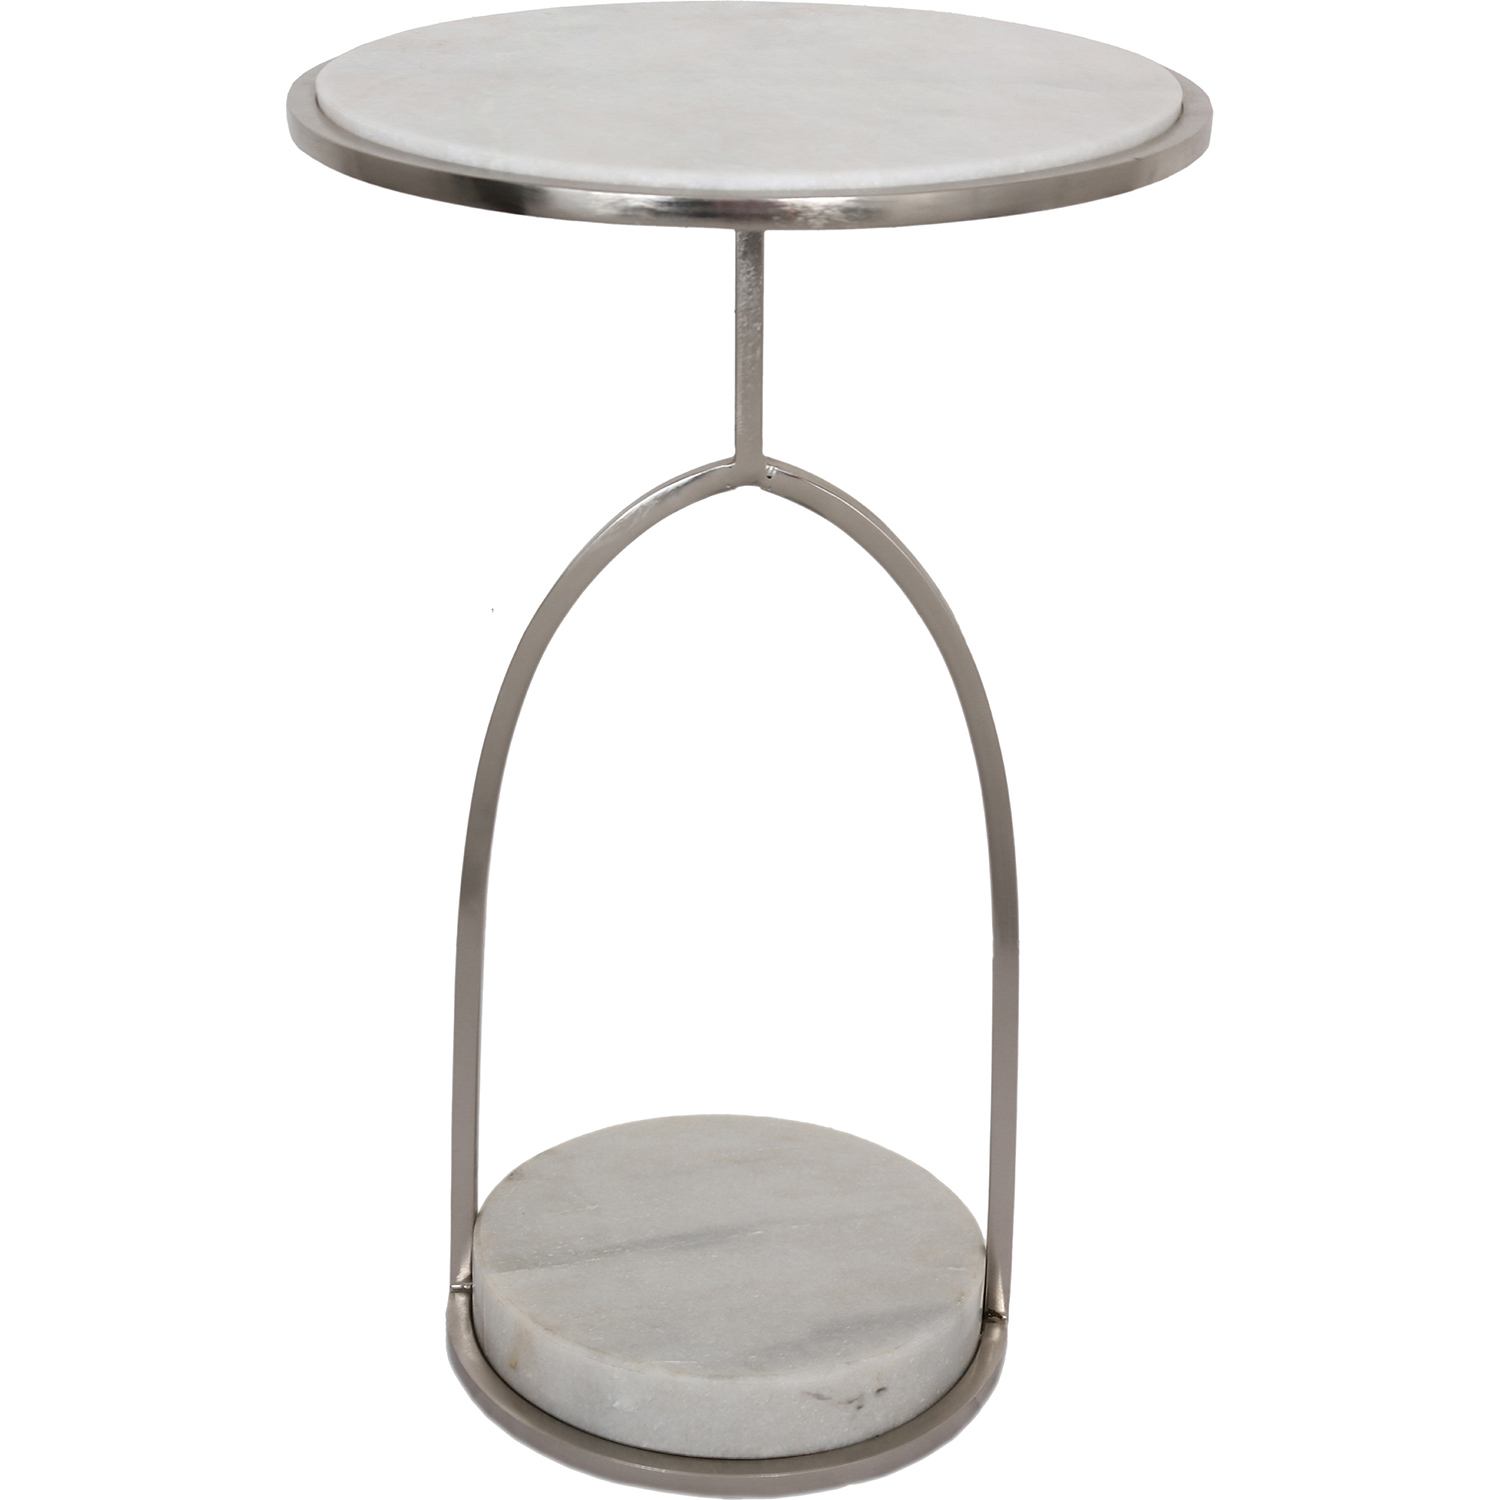 Ren-Wil Hadley Accent Table - White Marble/Nickel